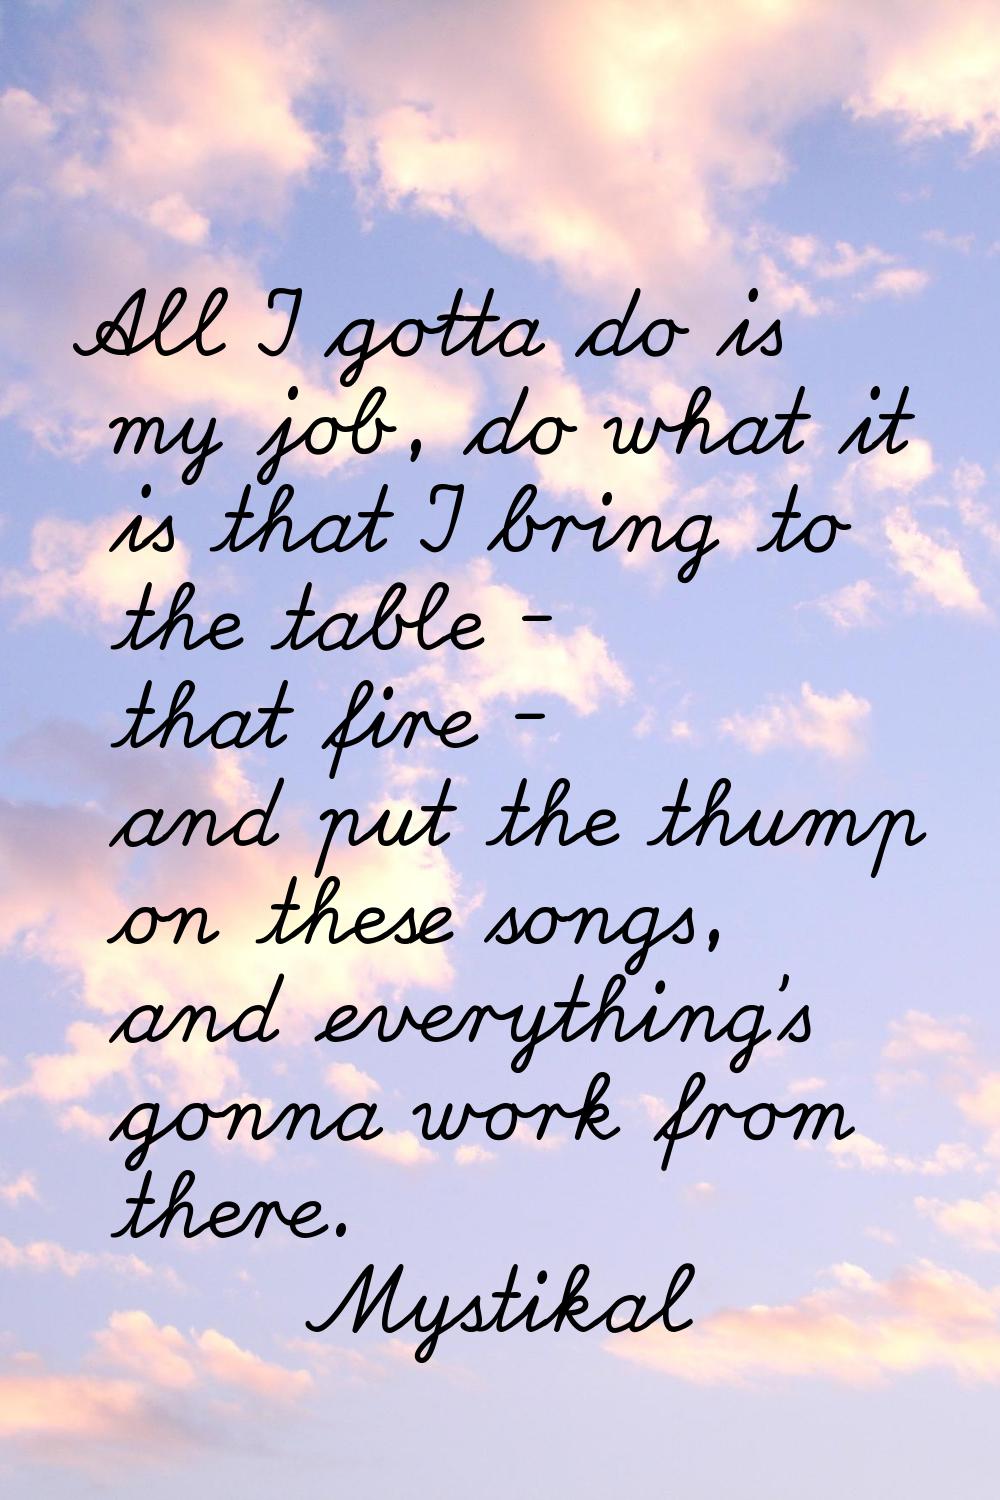 All I gotta do is my job, do what it is that I bring to the table - that fire - and put the thump o